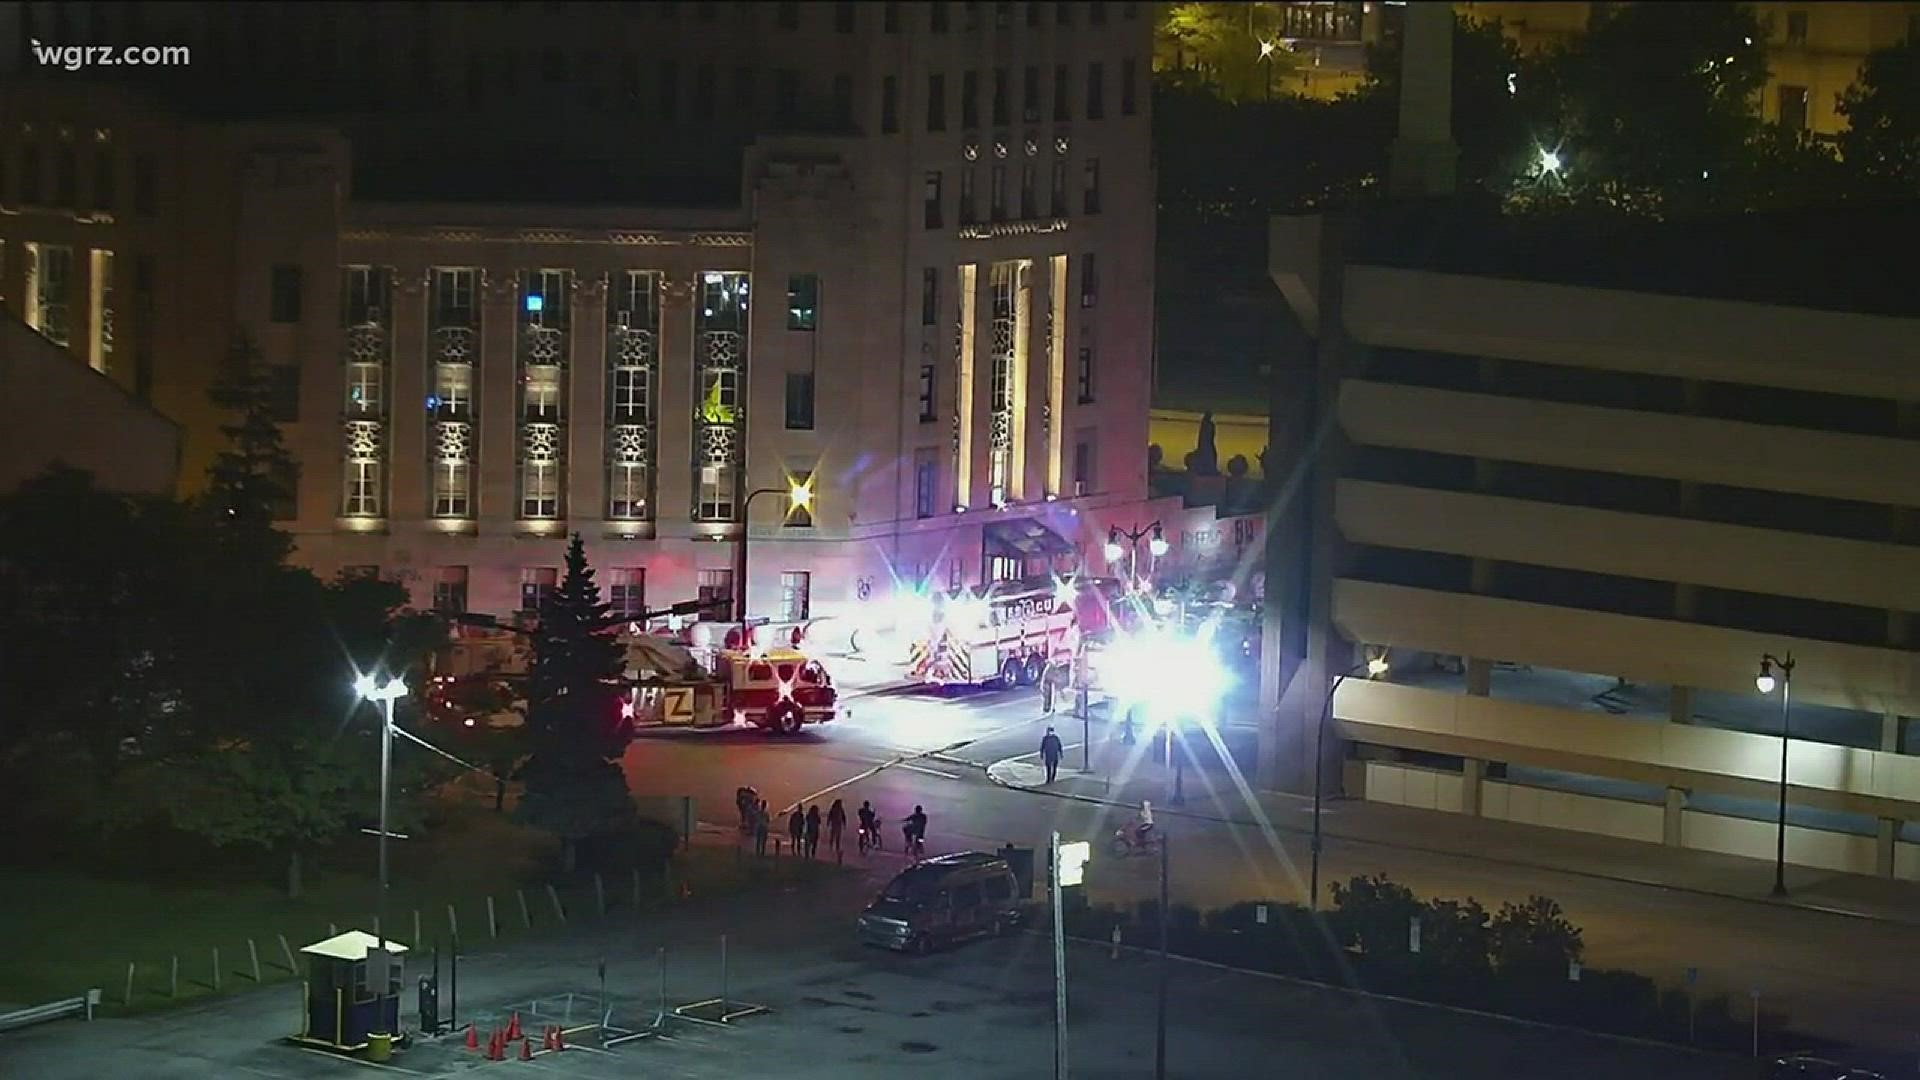 Protesting continues throughout downtown Buffalo with heavy police presence.